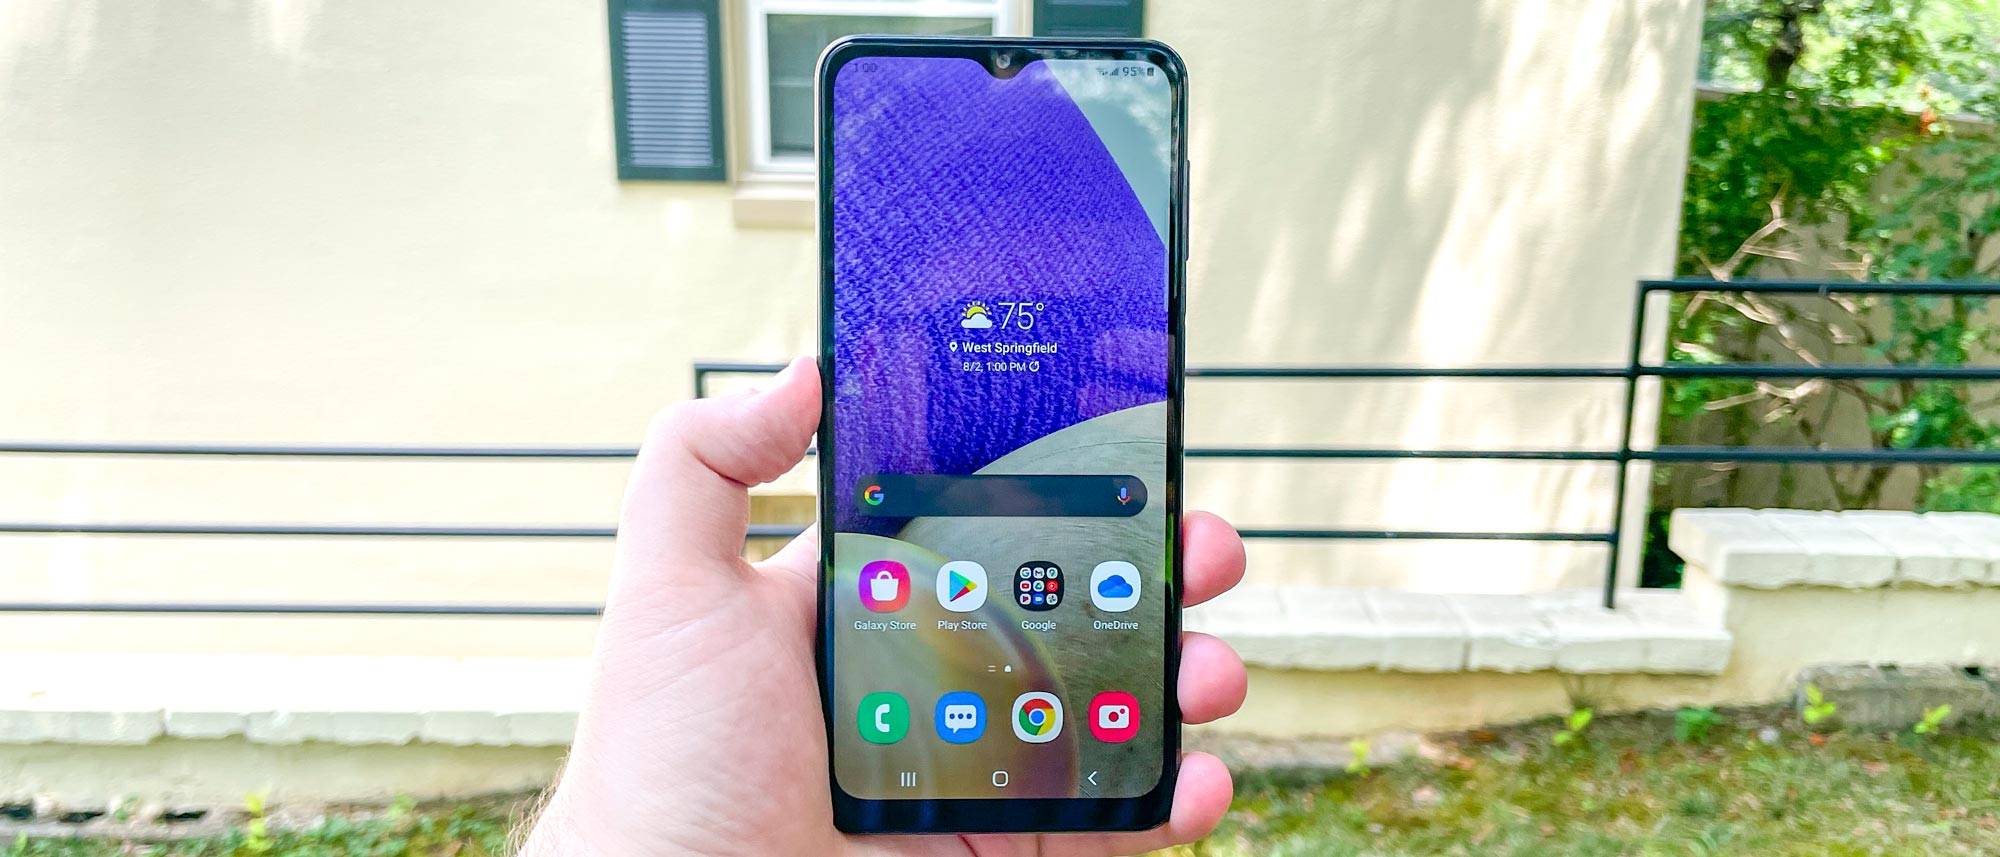 GALAXY A32 5G: CUT OFF FEATURES and HIGHER PRICE for a connection